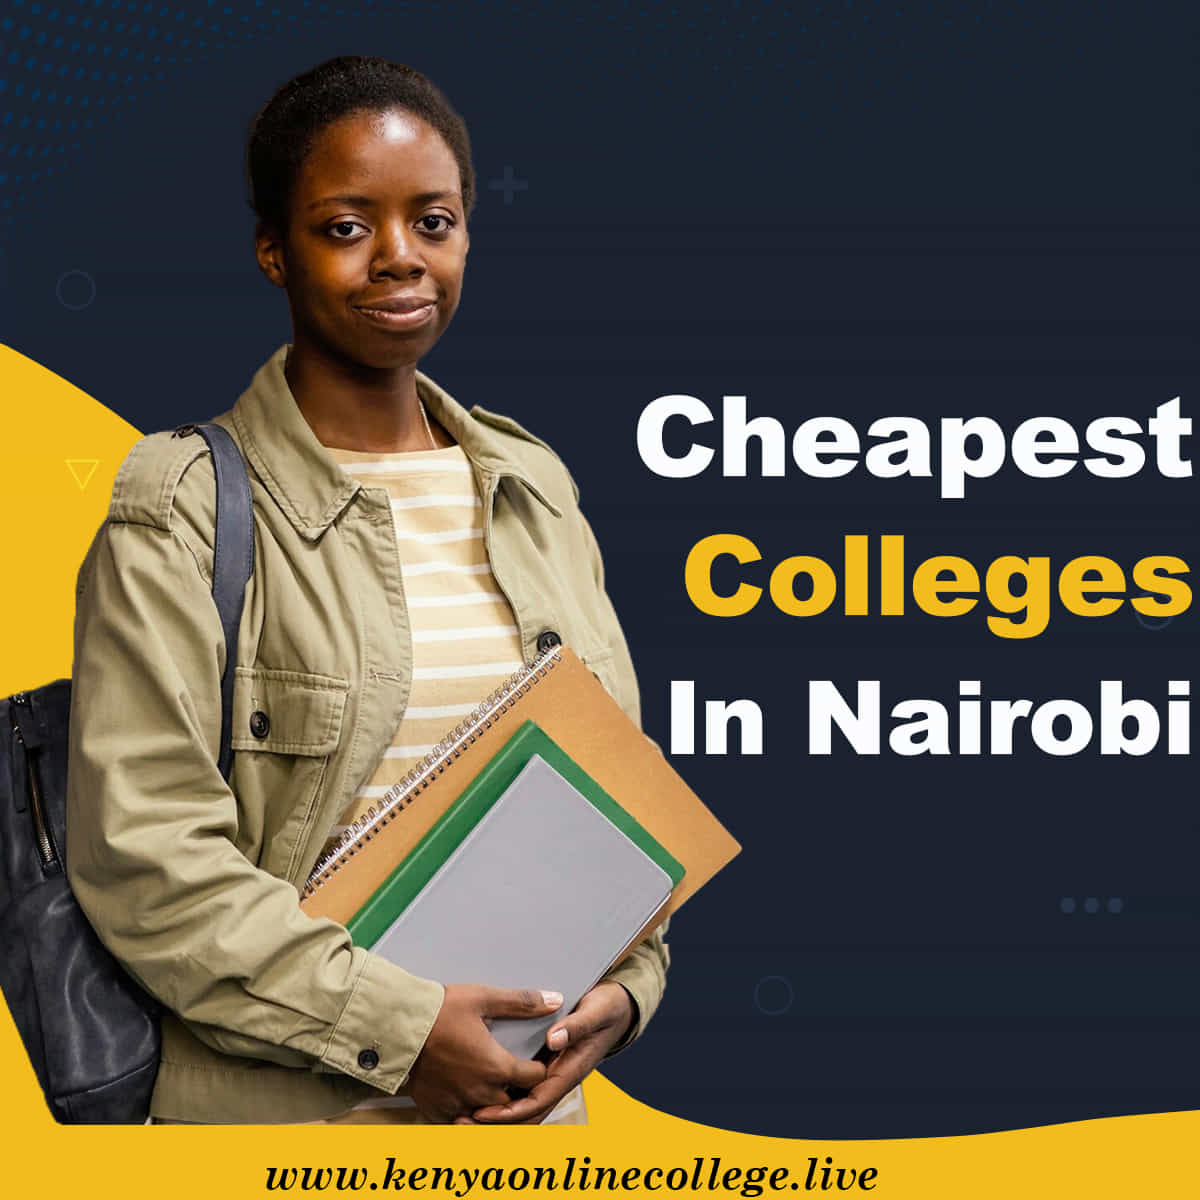 Cheapest colleges in Nairobi